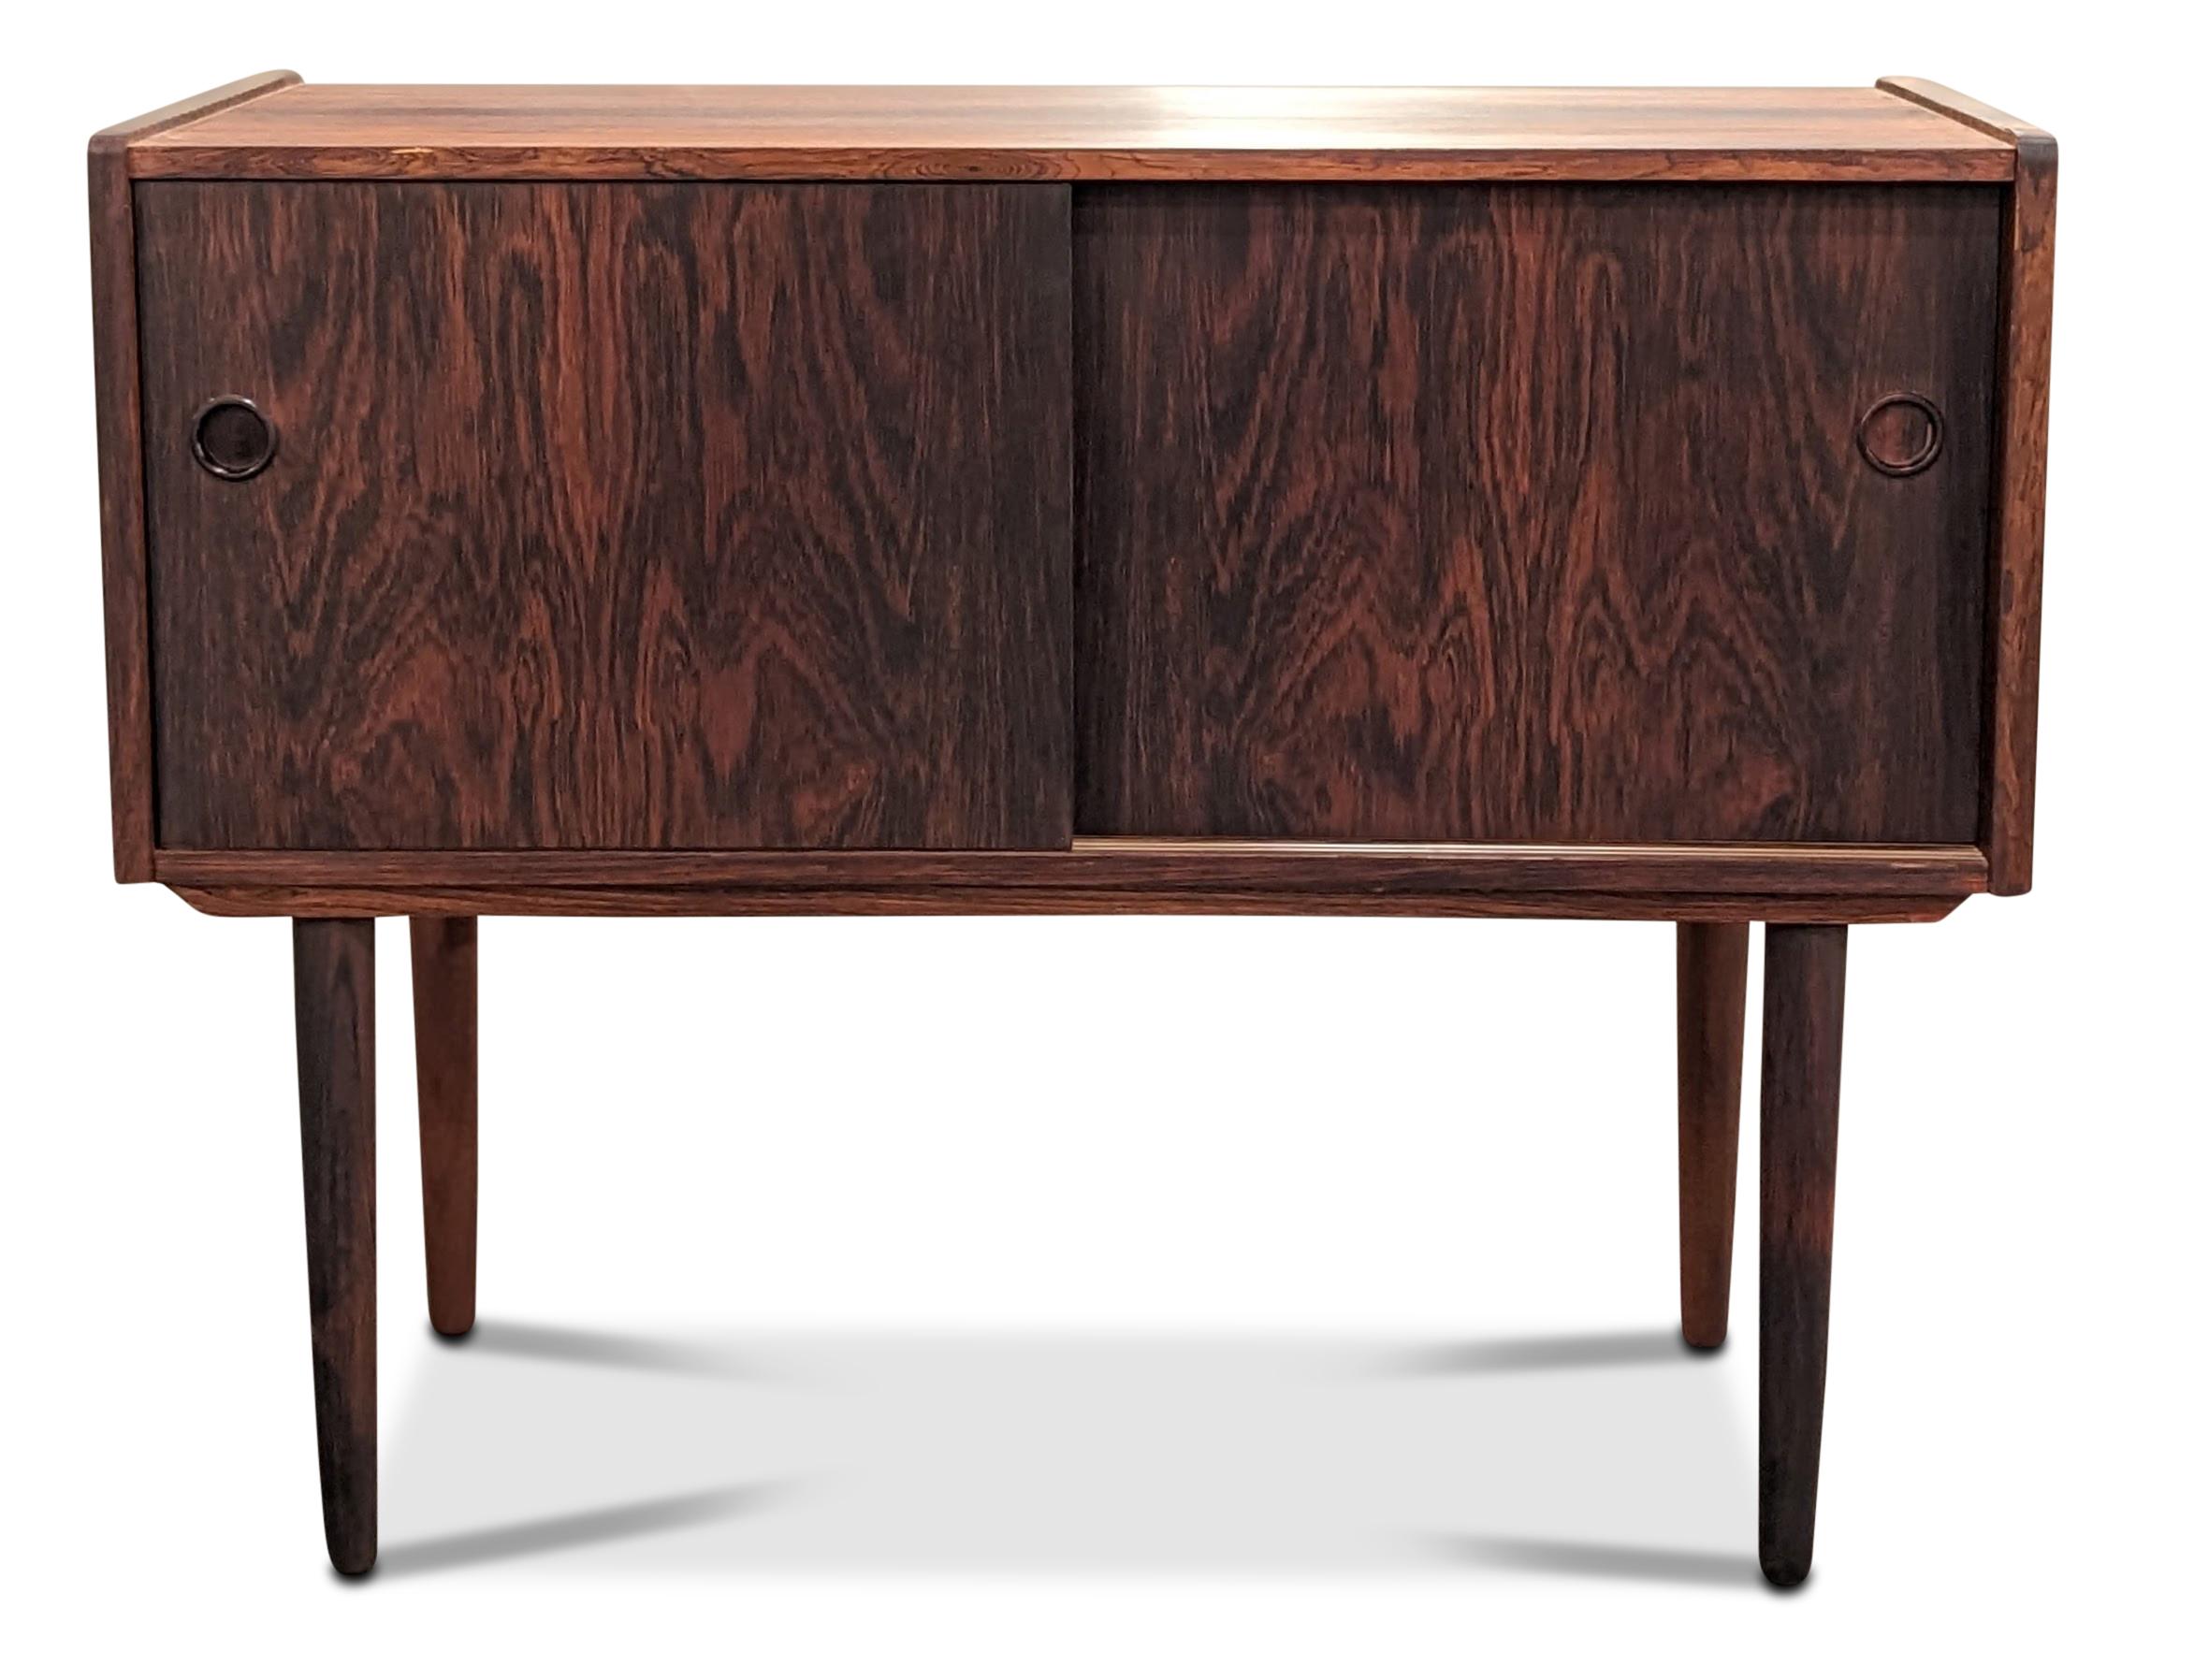 Vintage Danish Mid-Century Modern, made in the 1950s - recently refurbished.

These pieces are more than 65+ years old and some wear and tear can be expected, but we do everything we can to refurbish them in respect to the design.

Brazilian